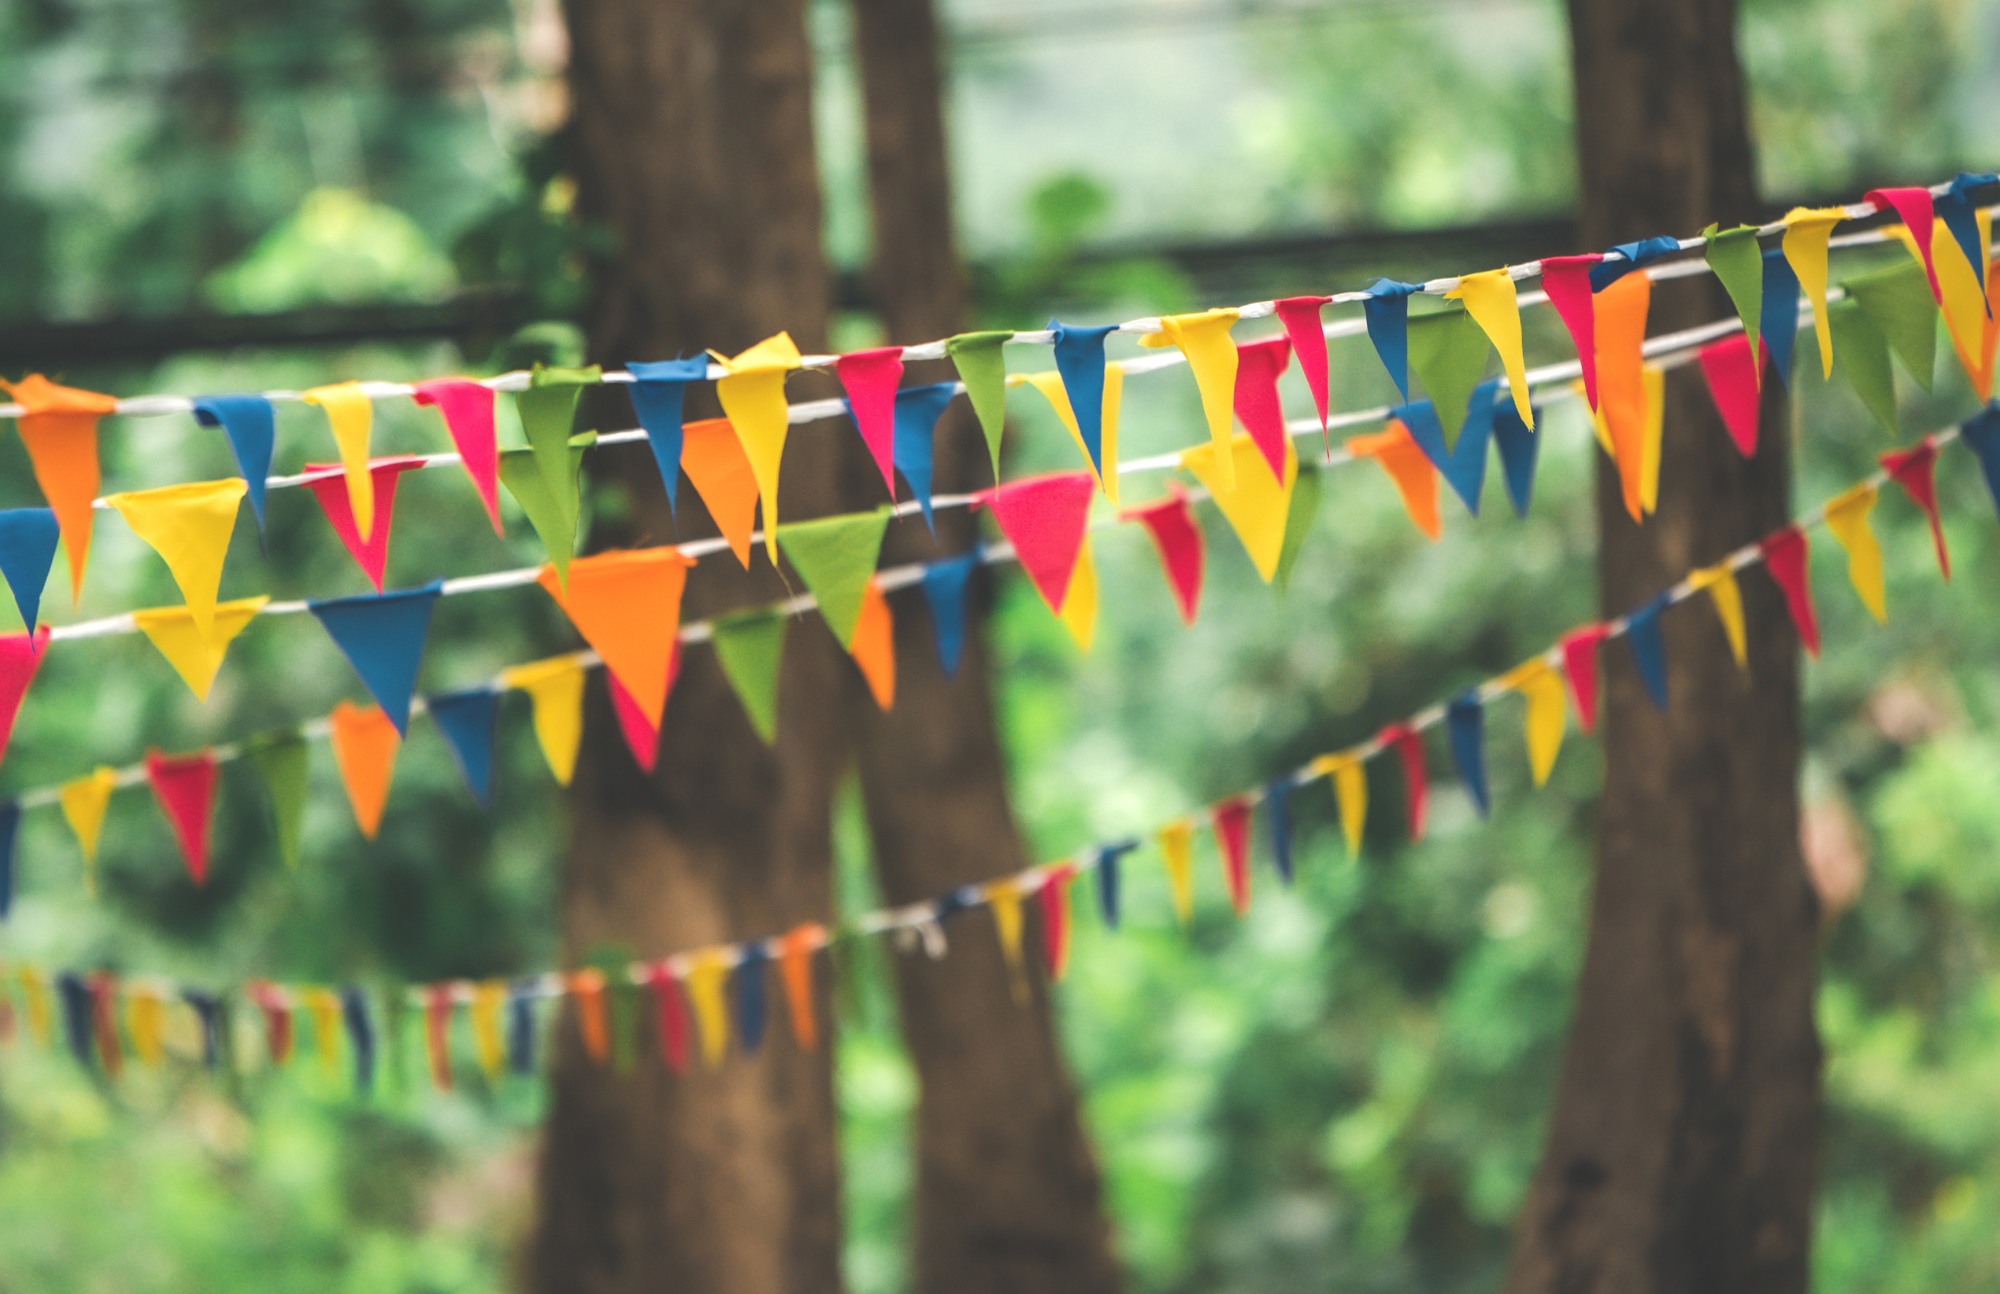 Party flags hang in a forest.